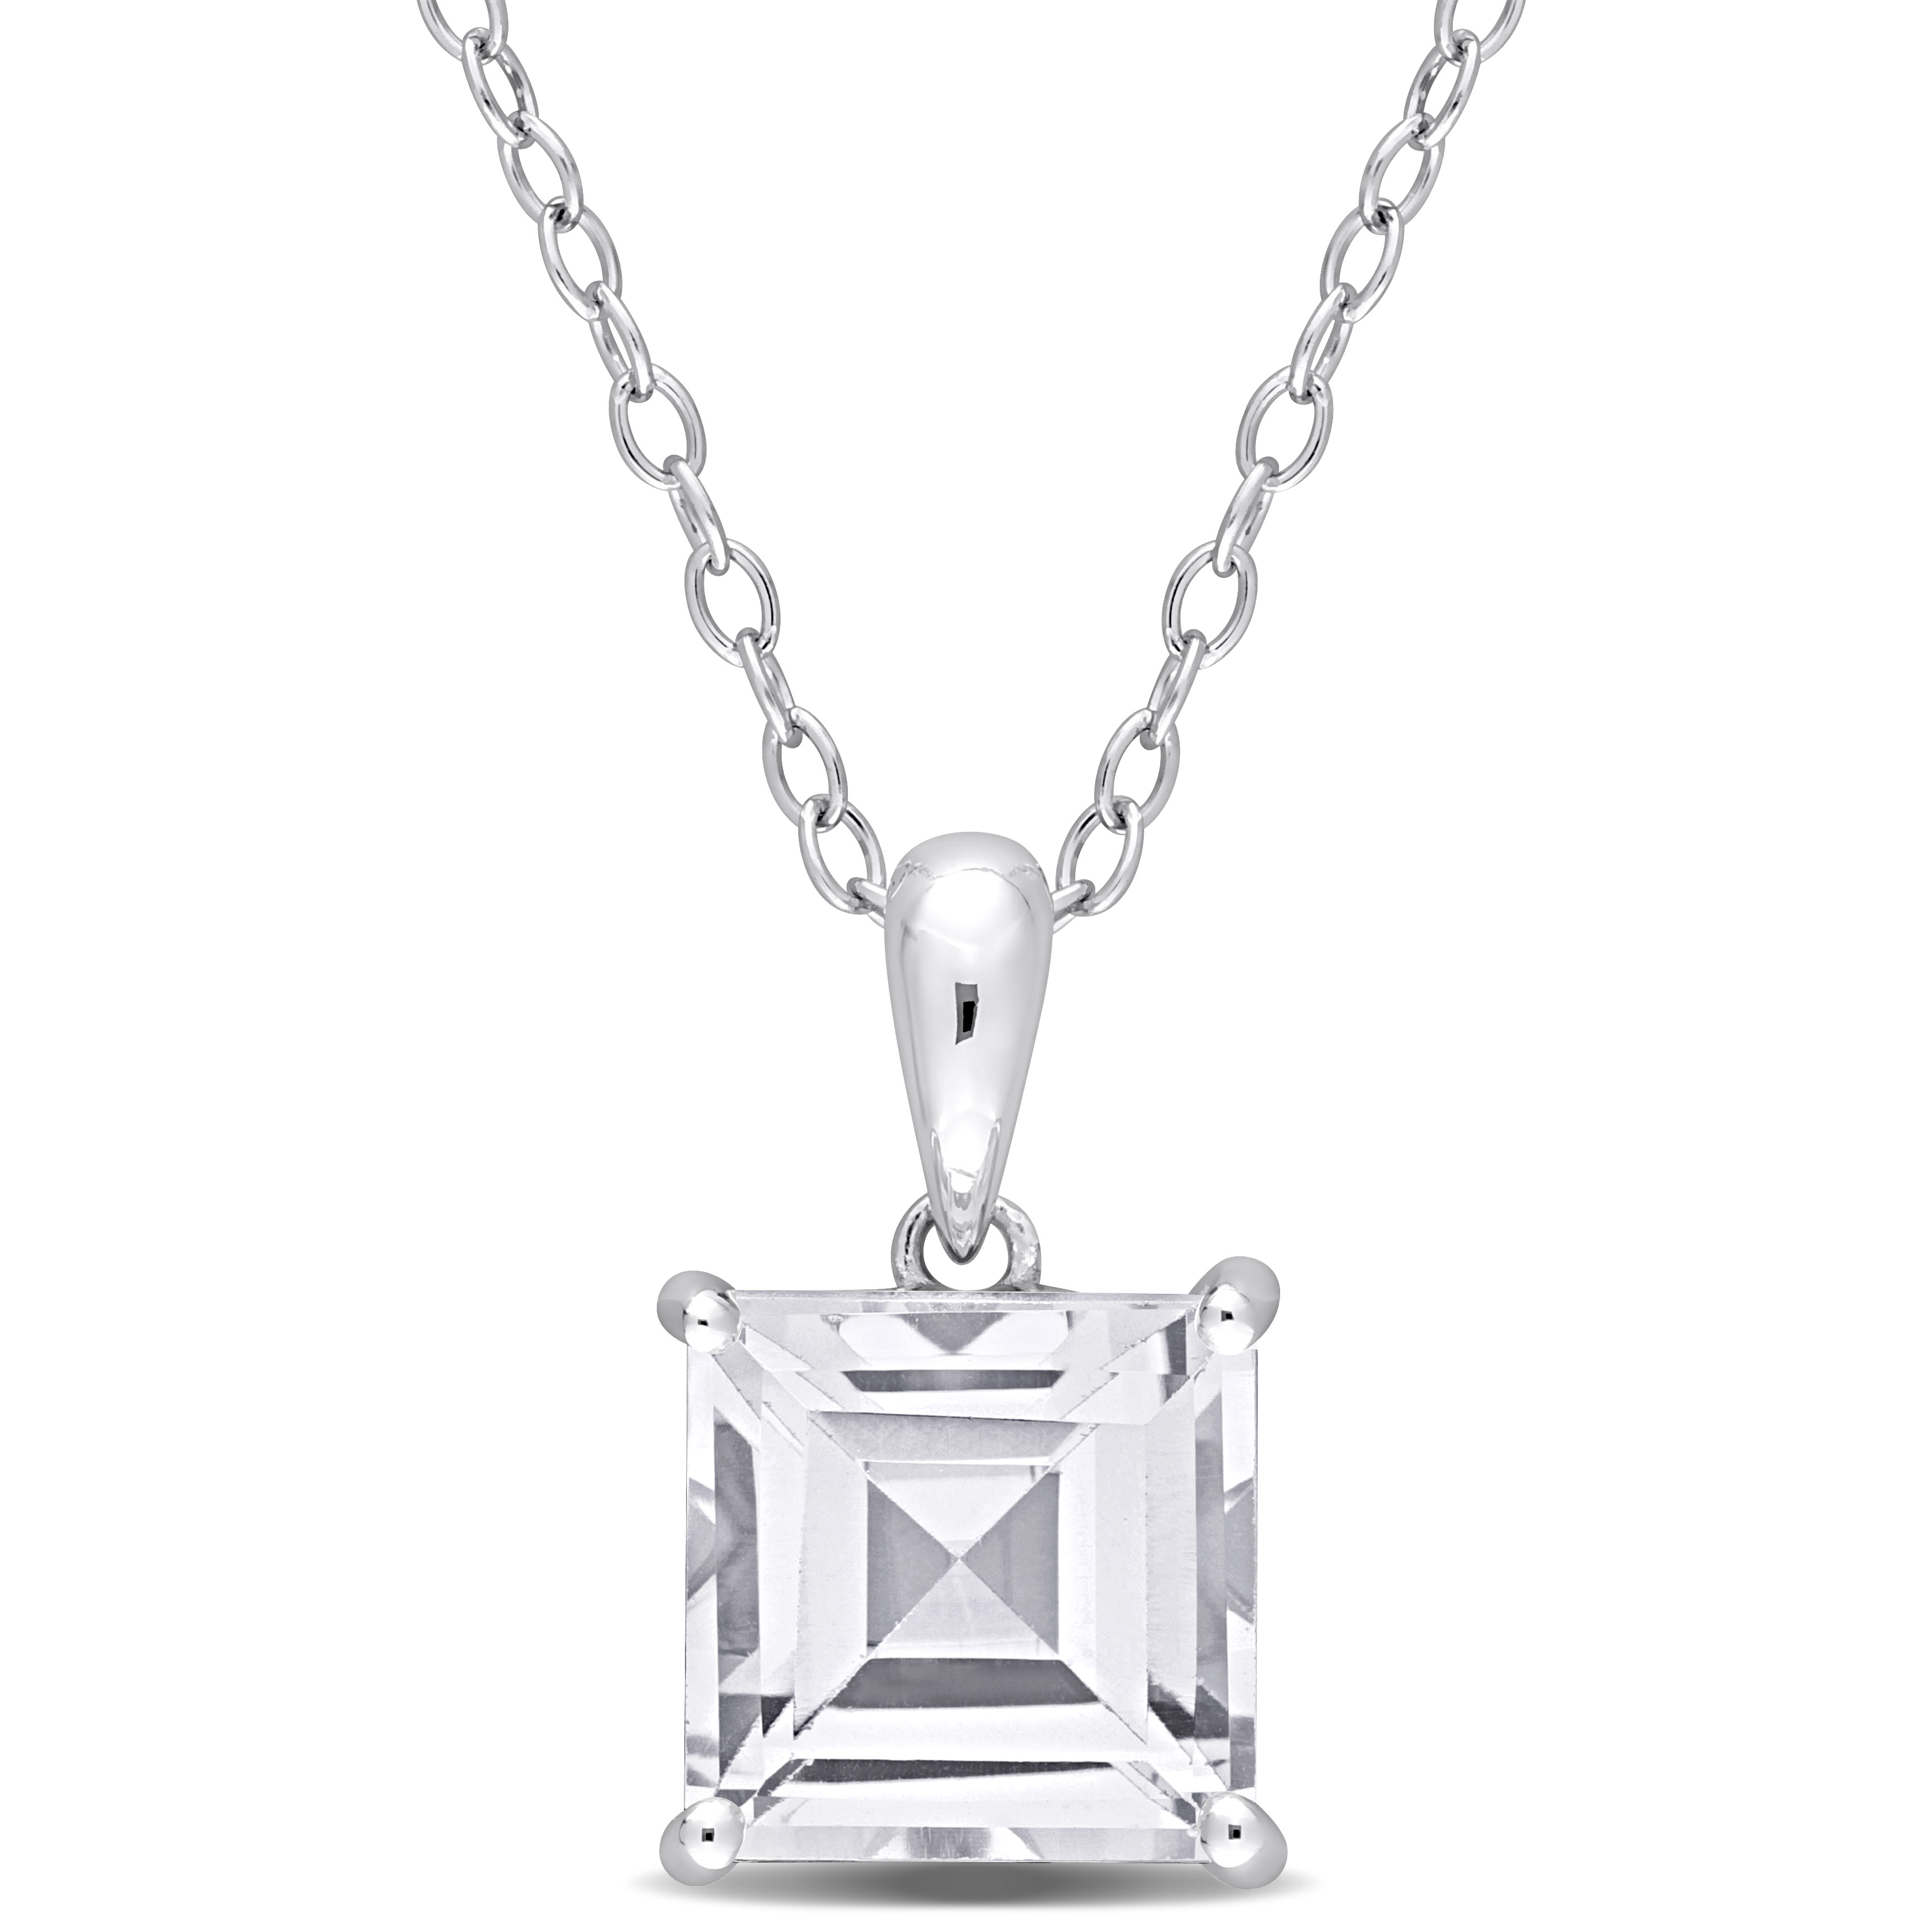 3 CT TGW Princess Cut White Topaz Solitaire Heart Design Pendant with Chain in Sterling Silver - 18 in.